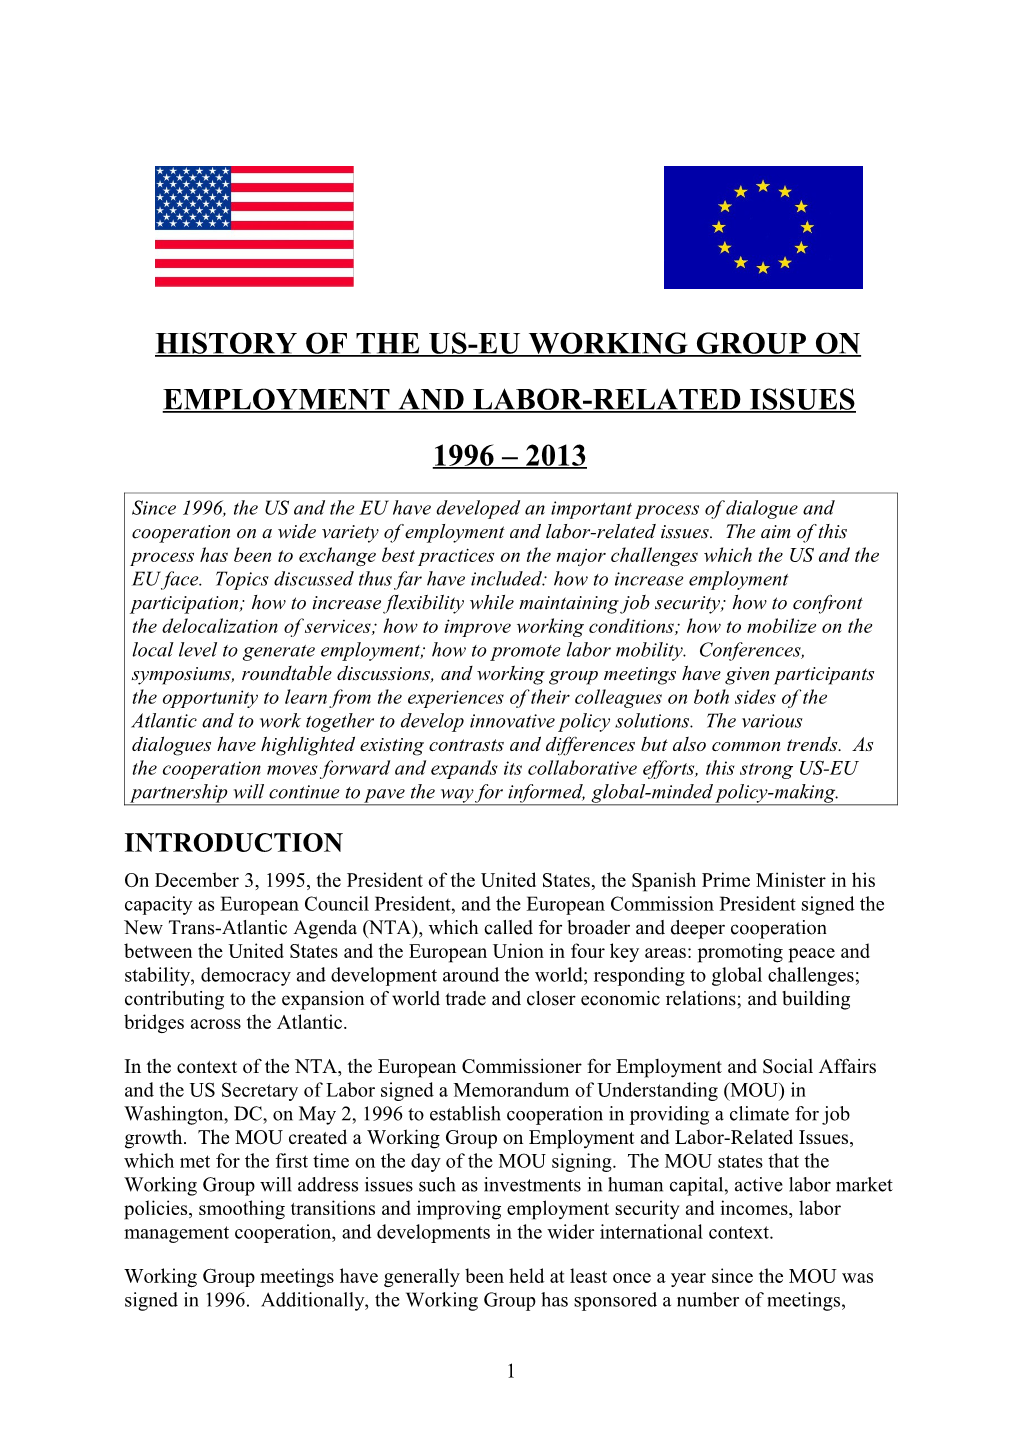 US-EU Working Group on Employment and Labor-Related Issues